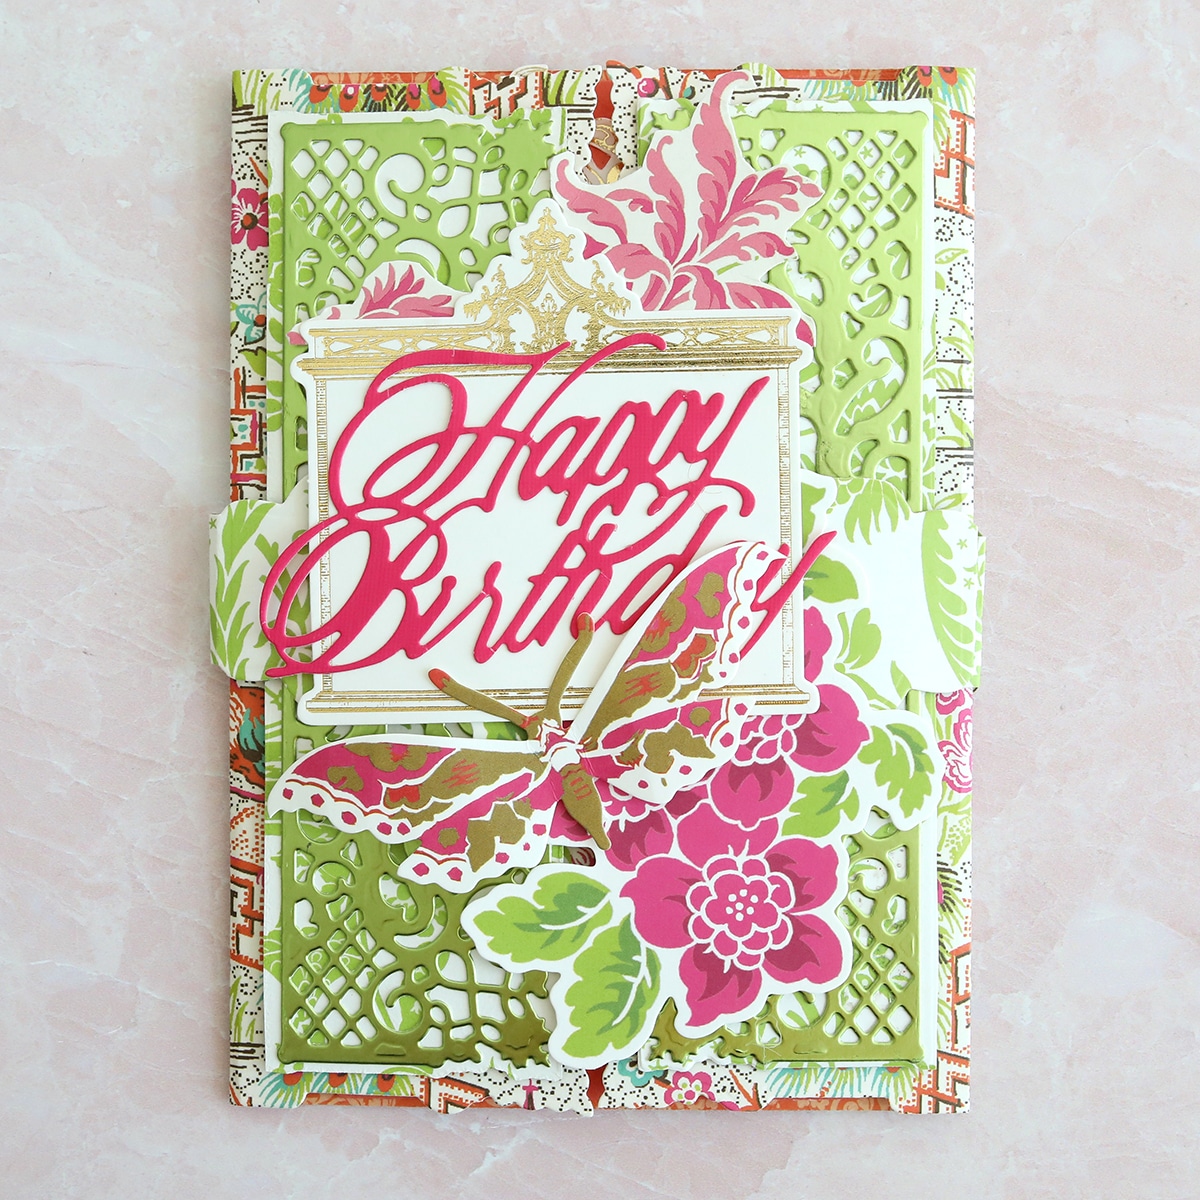 A card with a happy birthday message on it.